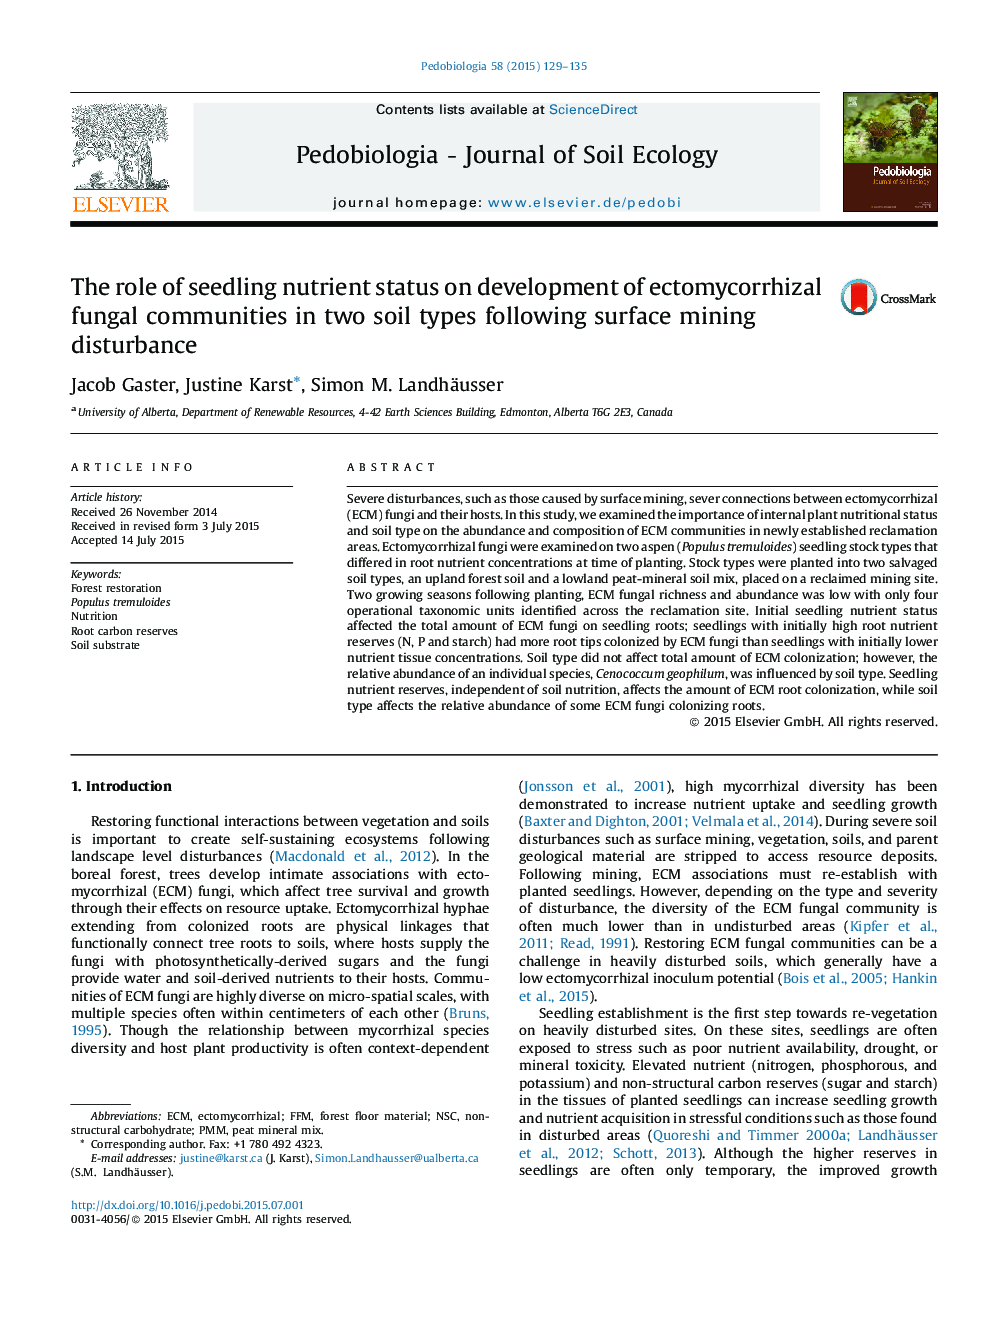 The role of seedling nutrient status on development of ectomycorrhizal fungal communities in two soil types following surface mining disturbance